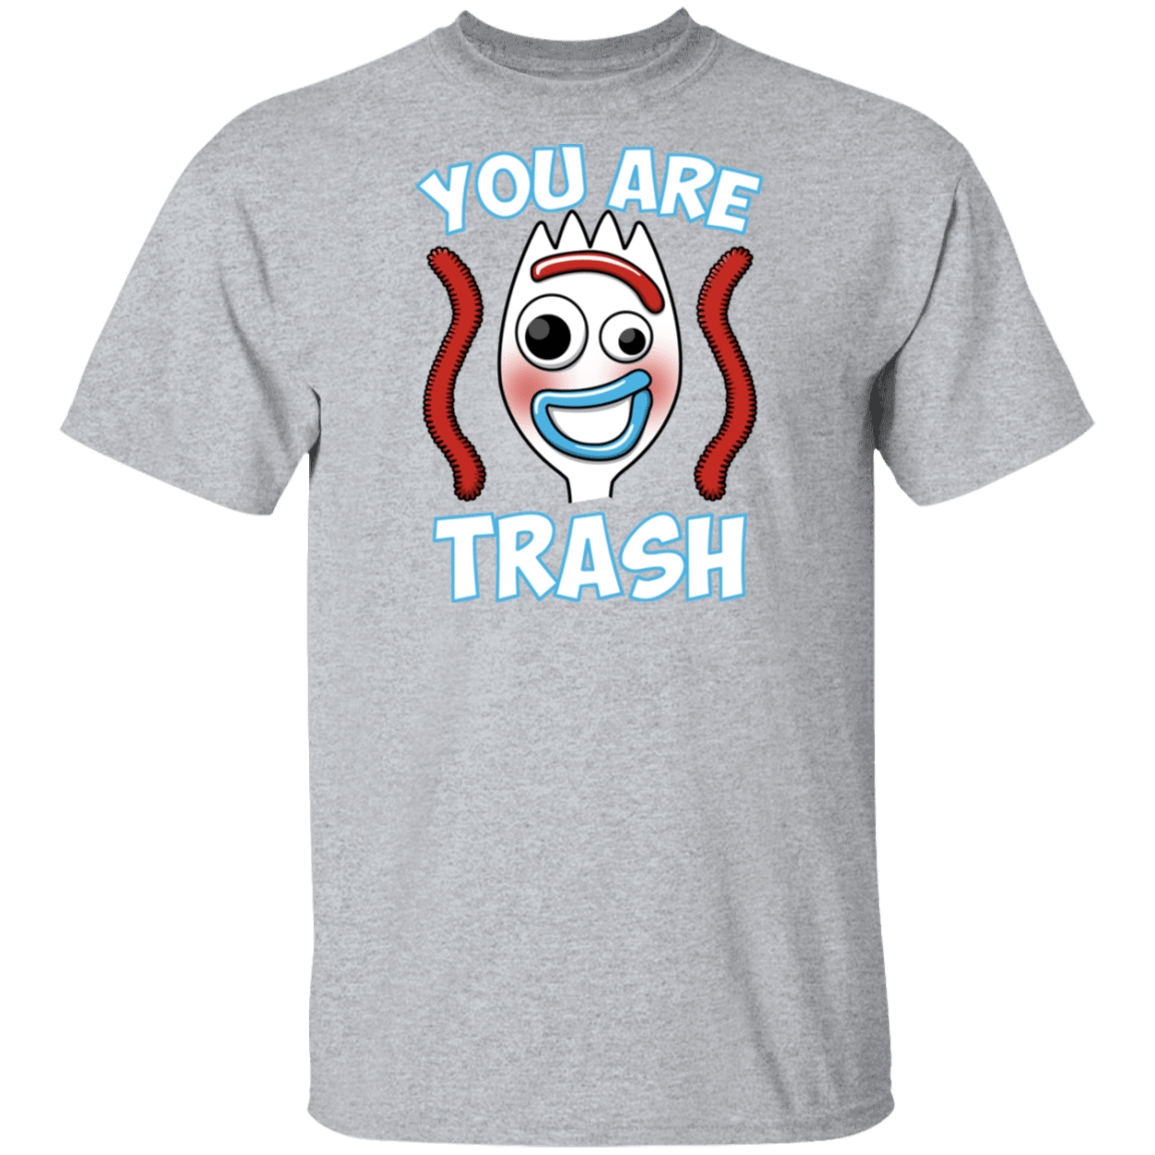 T-Shirts Sport Grey / S You Are Trash T-Shirt